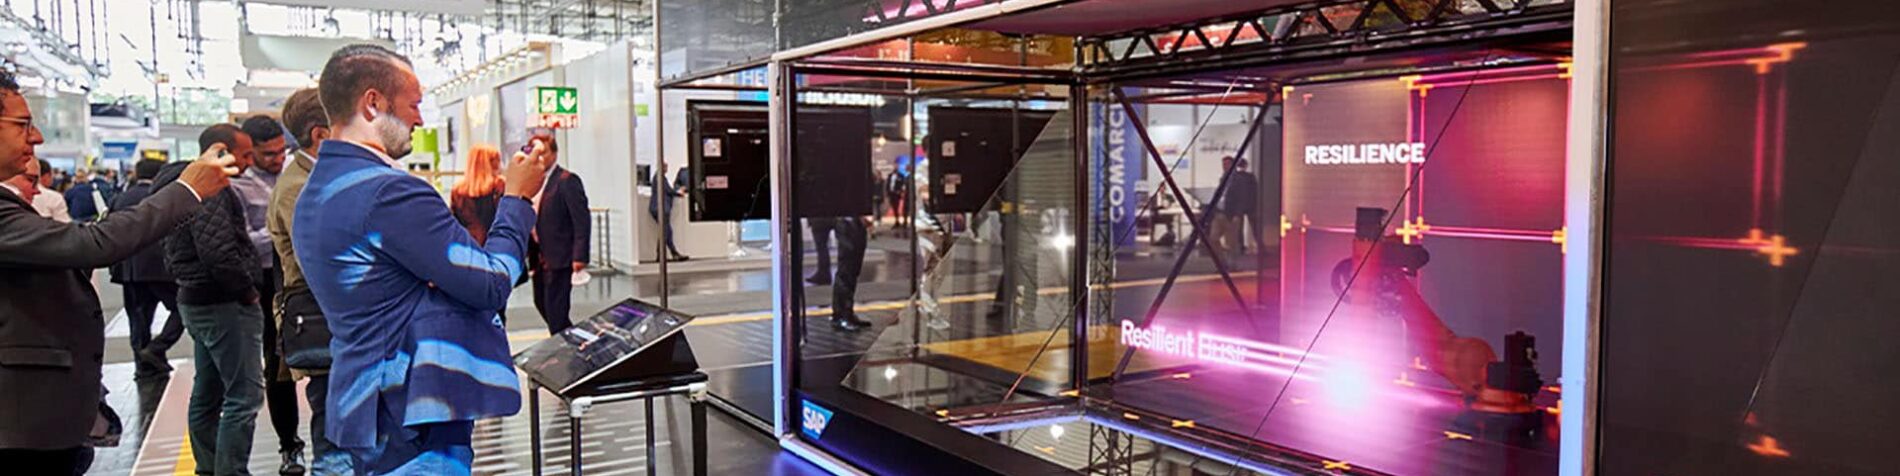 Hannover Messe Showcases Digitalization at Every Level